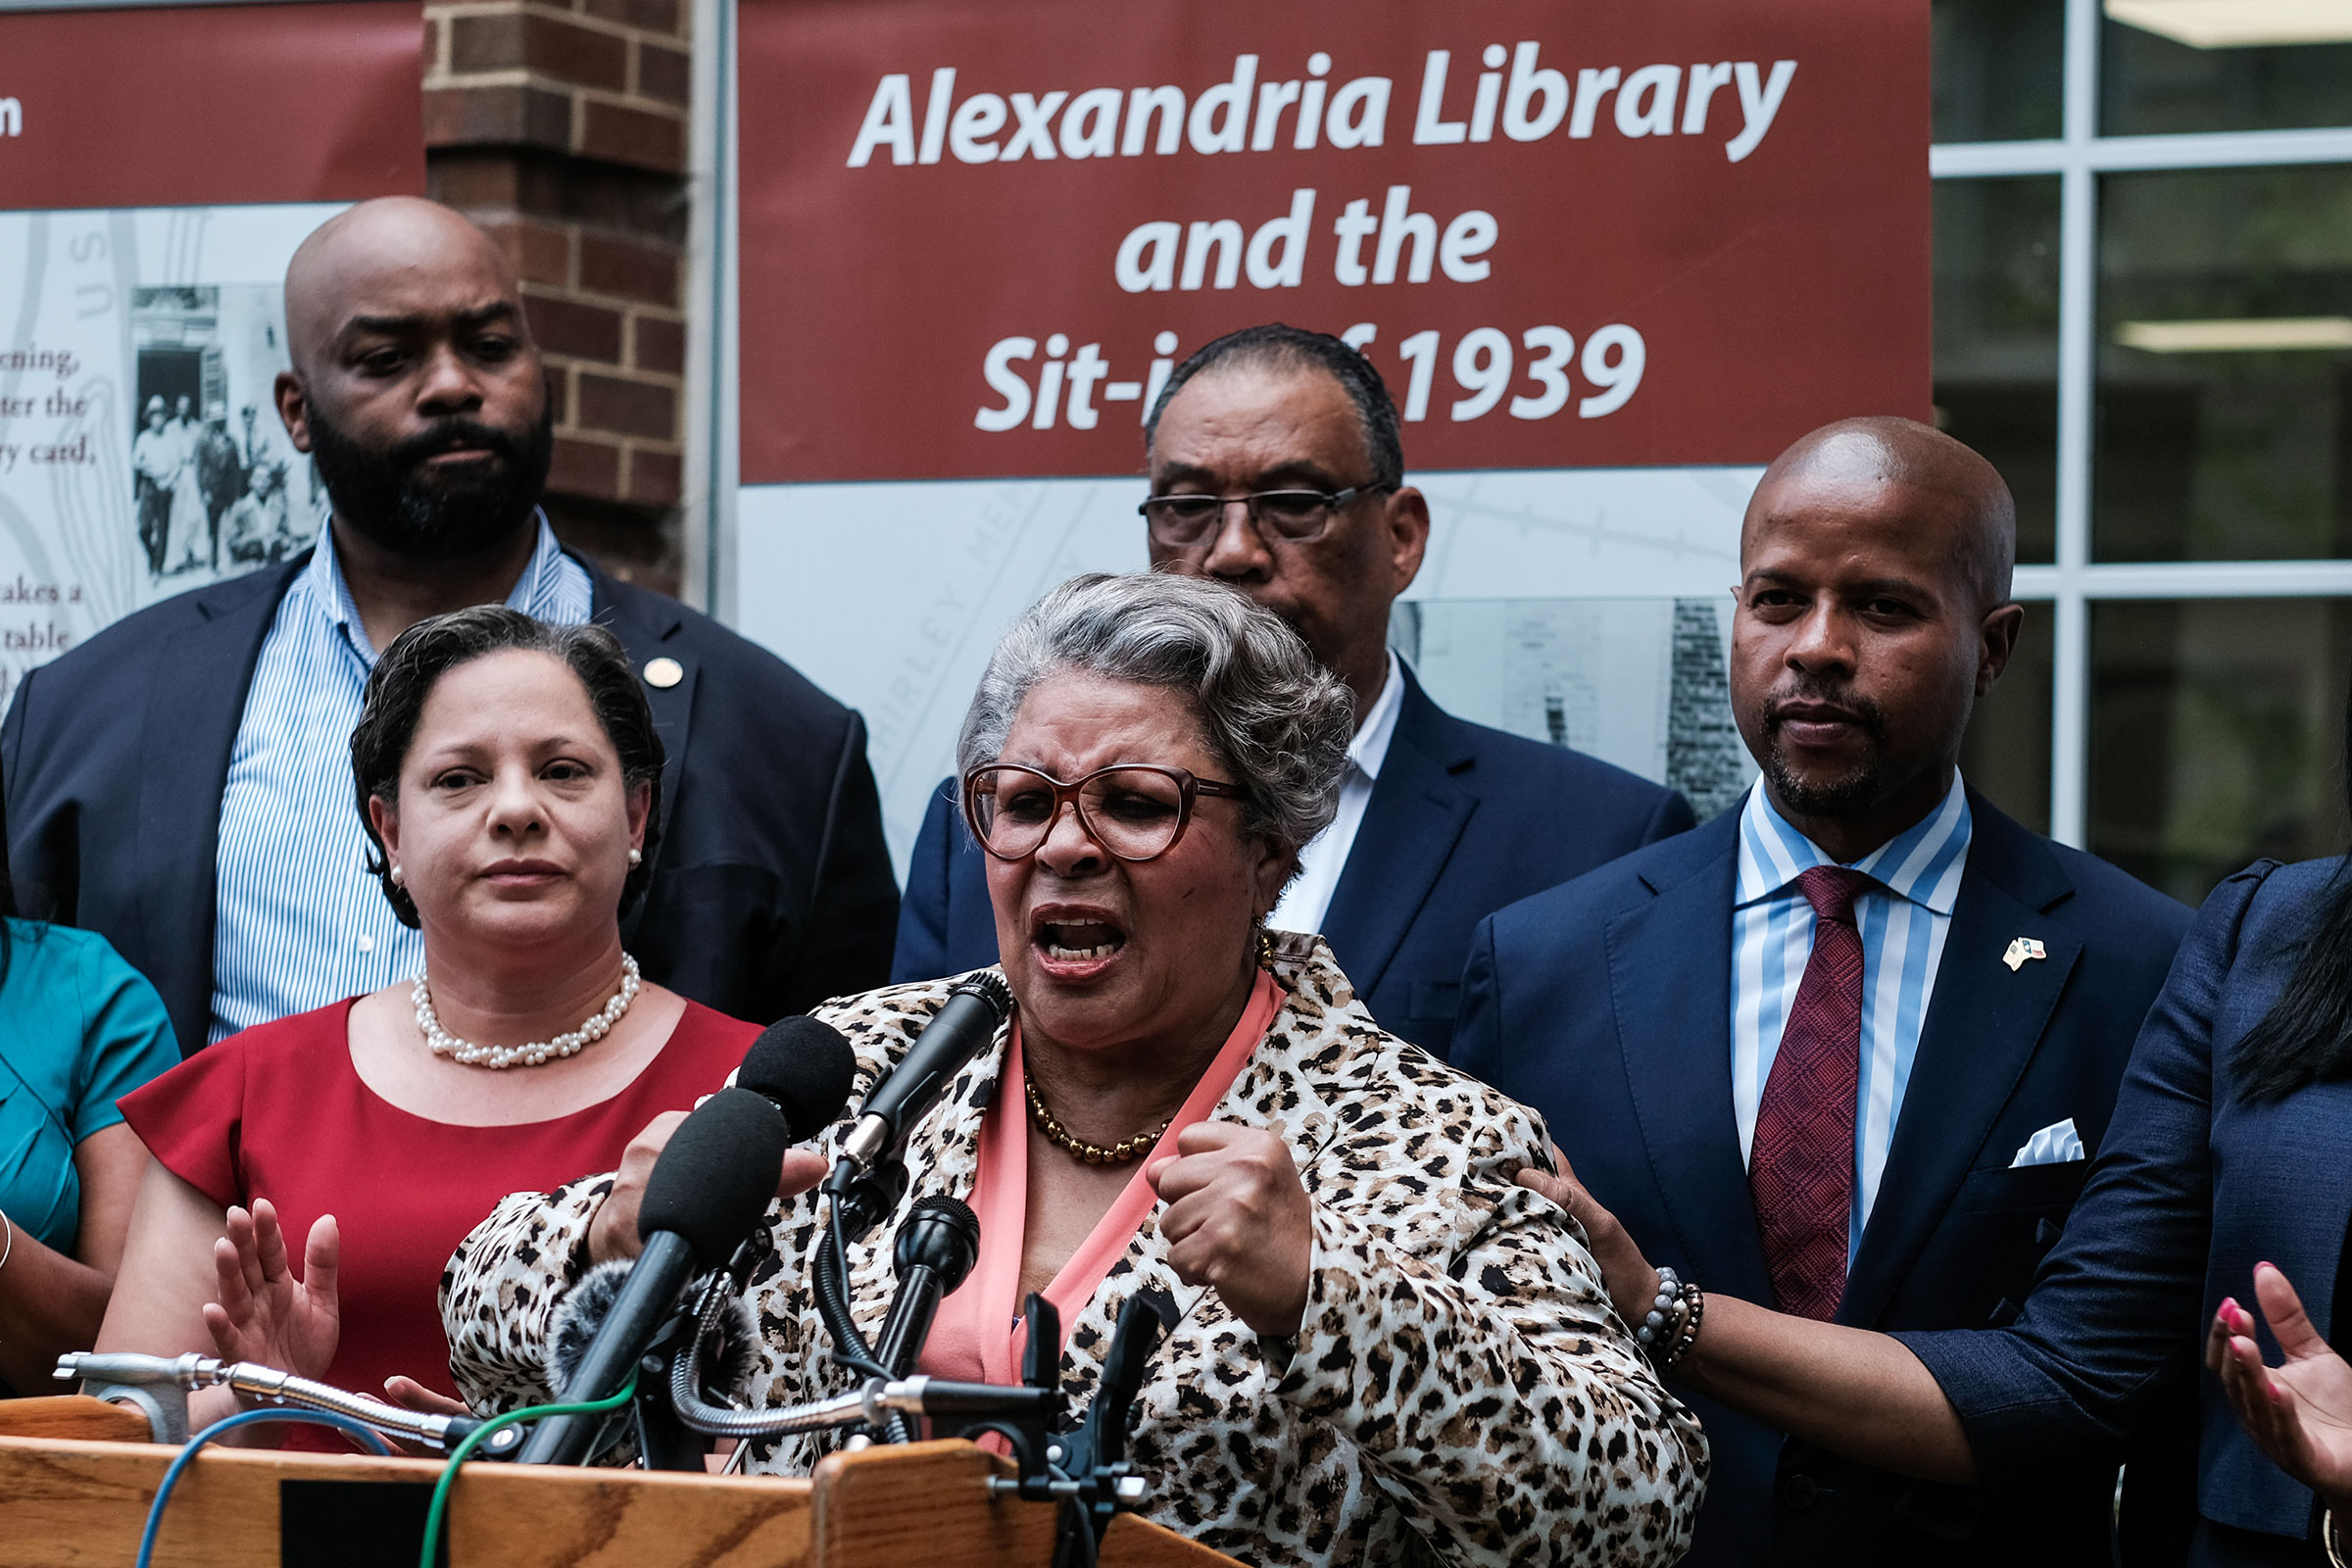 Texas Democrat Senfronia Thompson speaks at a press conference on voting rights outside of the Kate Waller Barrett Branch Library in Alexandria, VA on July, 16, 2021. (Michael A. McCoy for TIME)